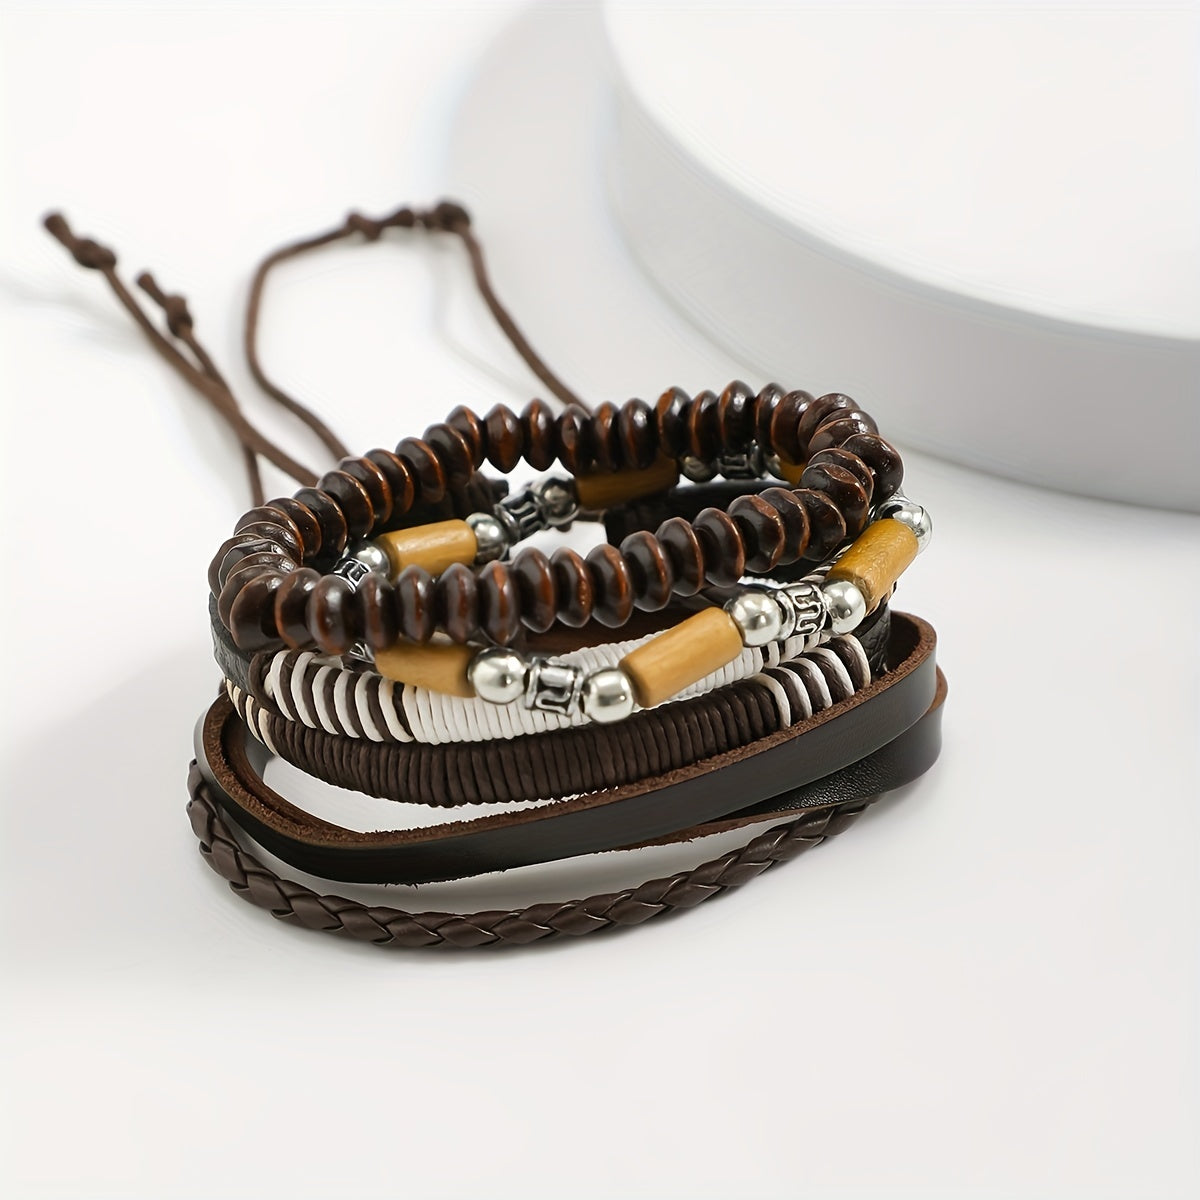 4pcs/set Vintage Exaggerated PU Beads Wooden Beads Braided Adjustable Bracelet For Women Men Unisex Accessories